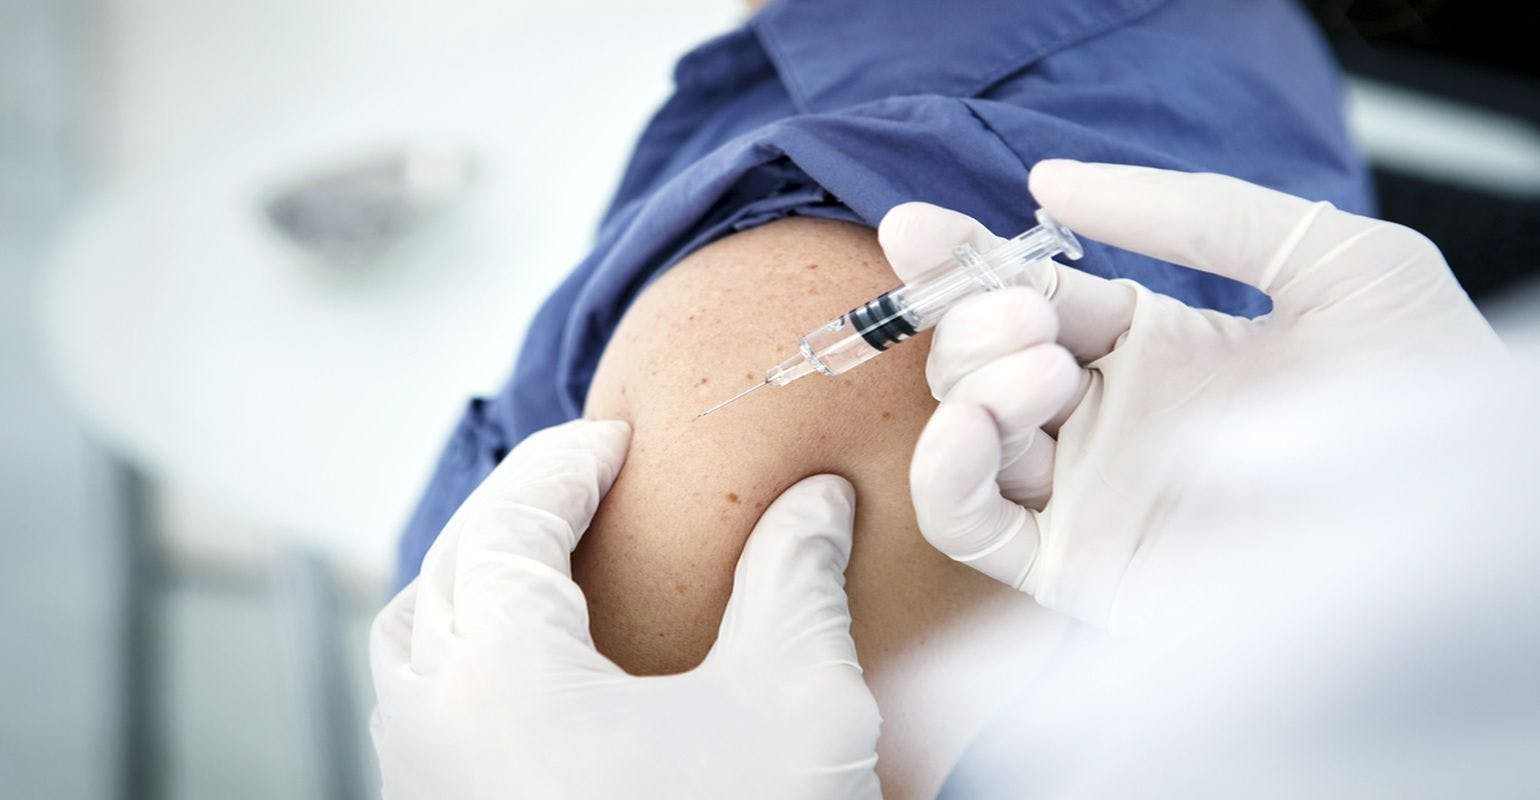 Study: Most Hospitals Now Require Workers to Get Flu Shots, Except Those That Treat Veterans